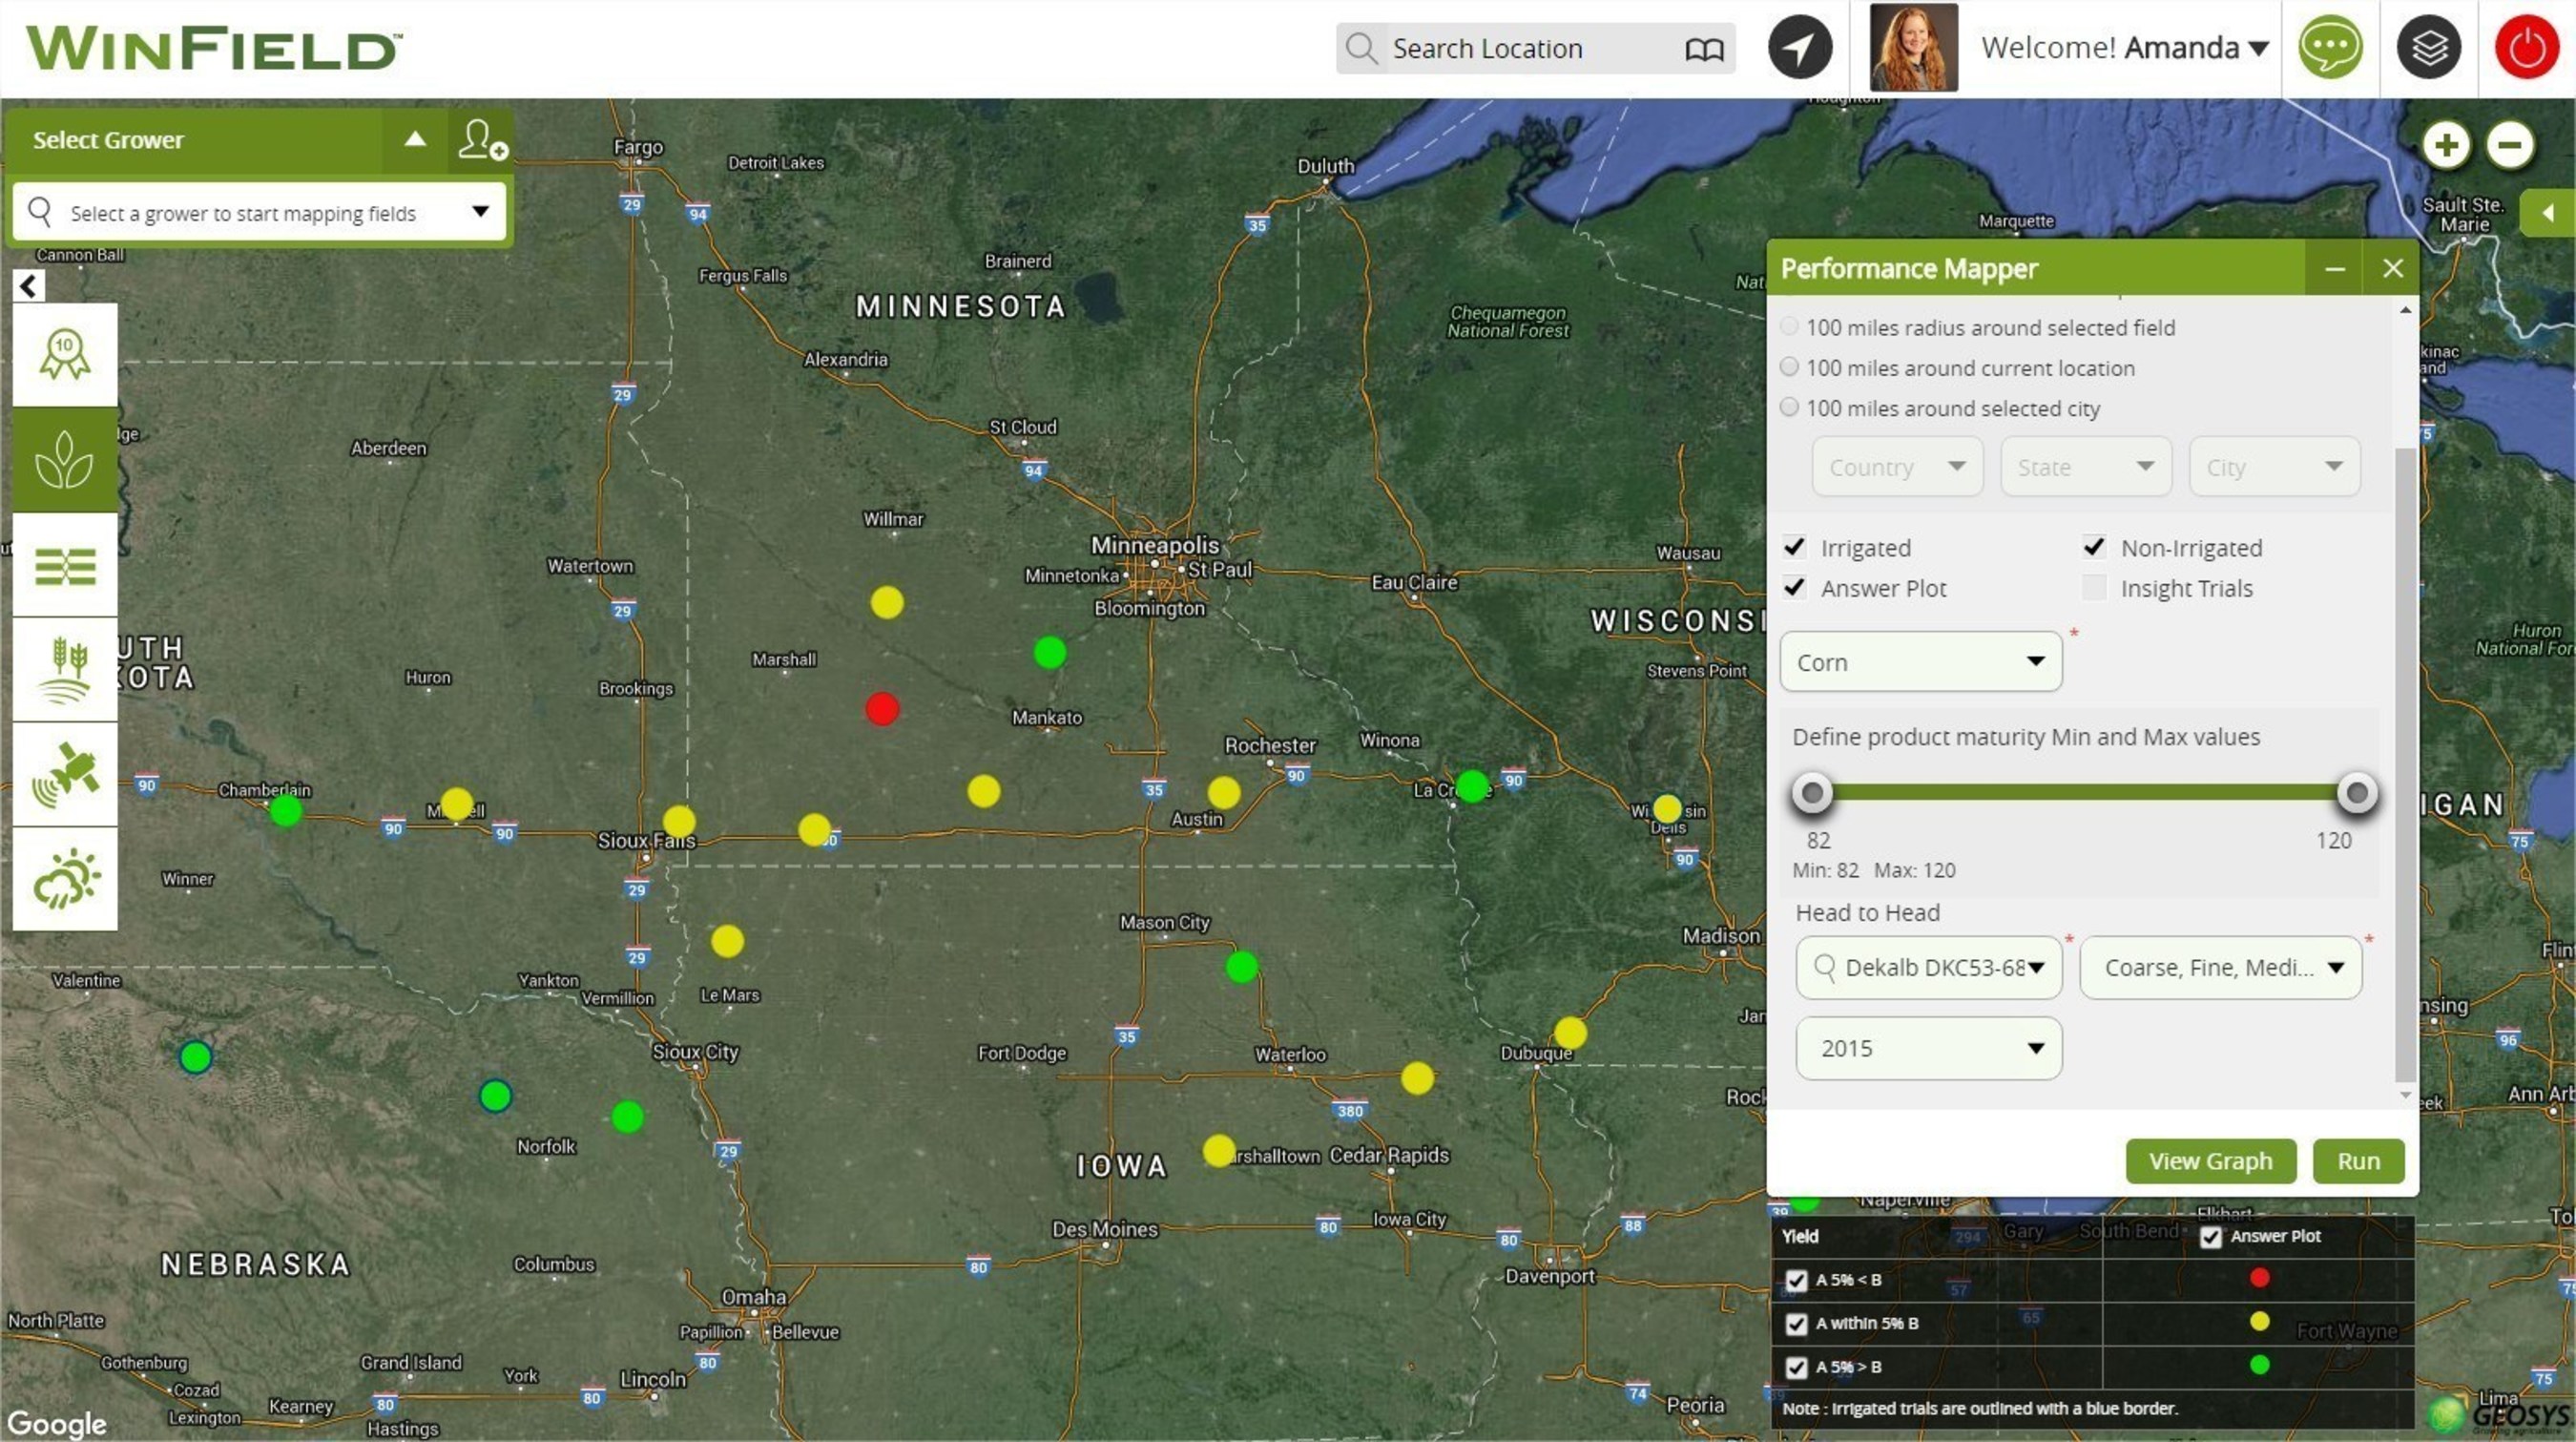 The R7 Tool from Winfield US contains Answer Plot data from nearly 200 locations across the United States.